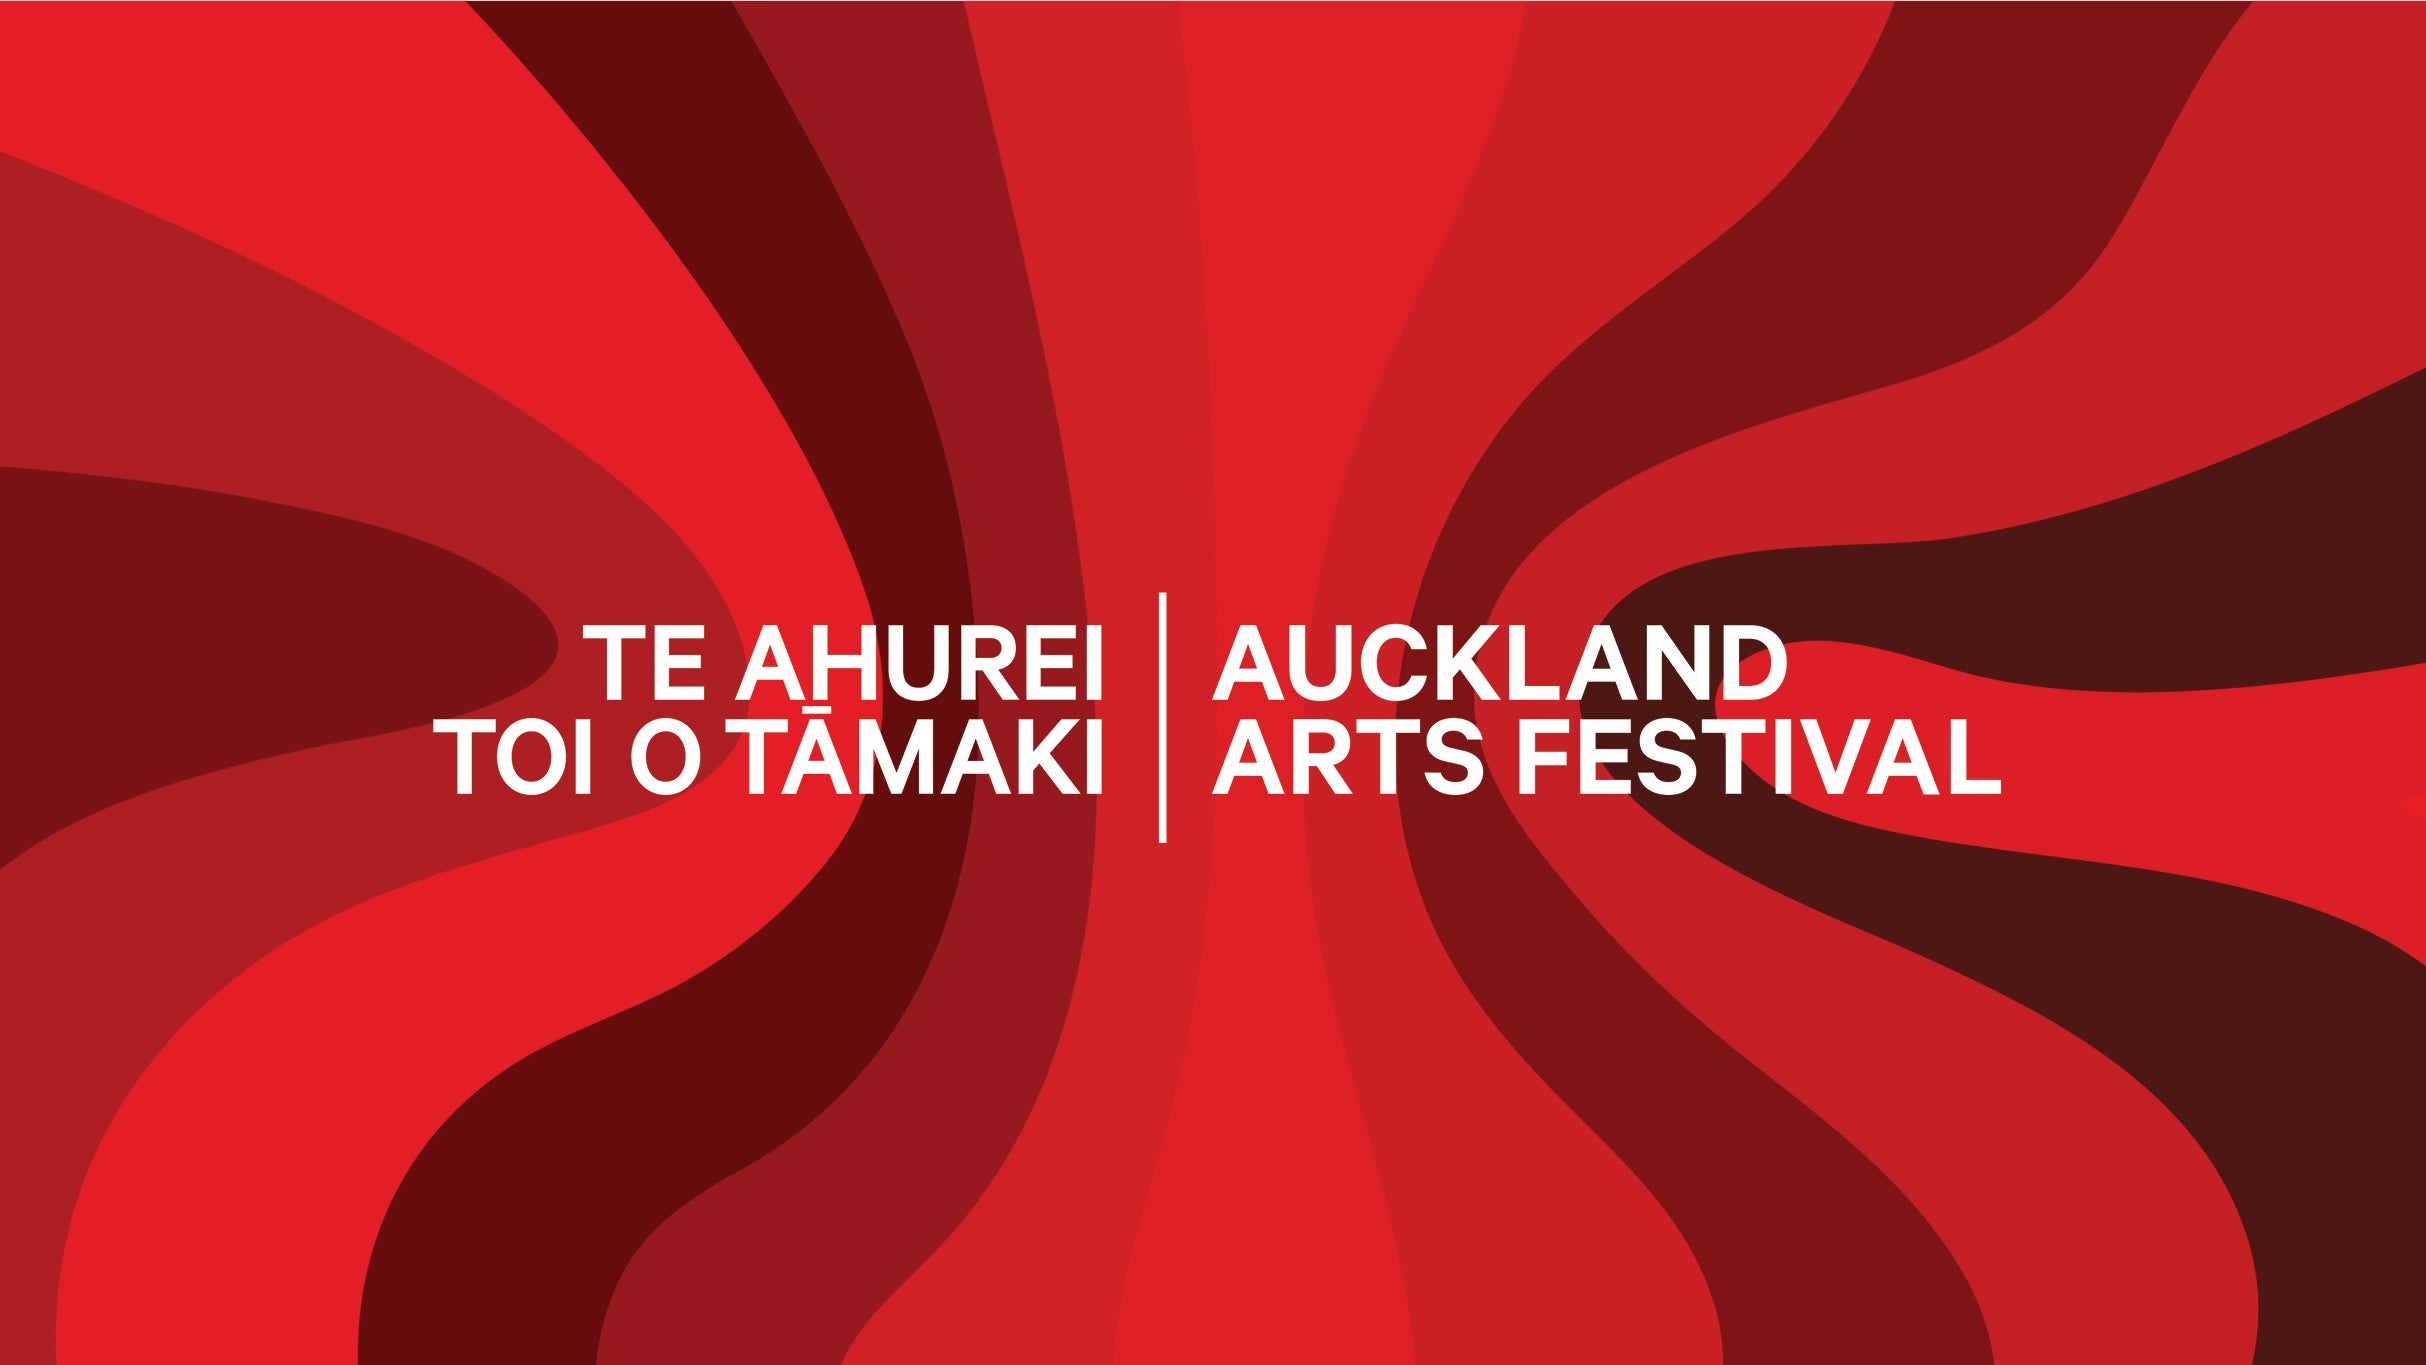 AKLFEST: Martin Hayes & Guests in Auckland promo photo for Auckland Arts Festival presale offer code